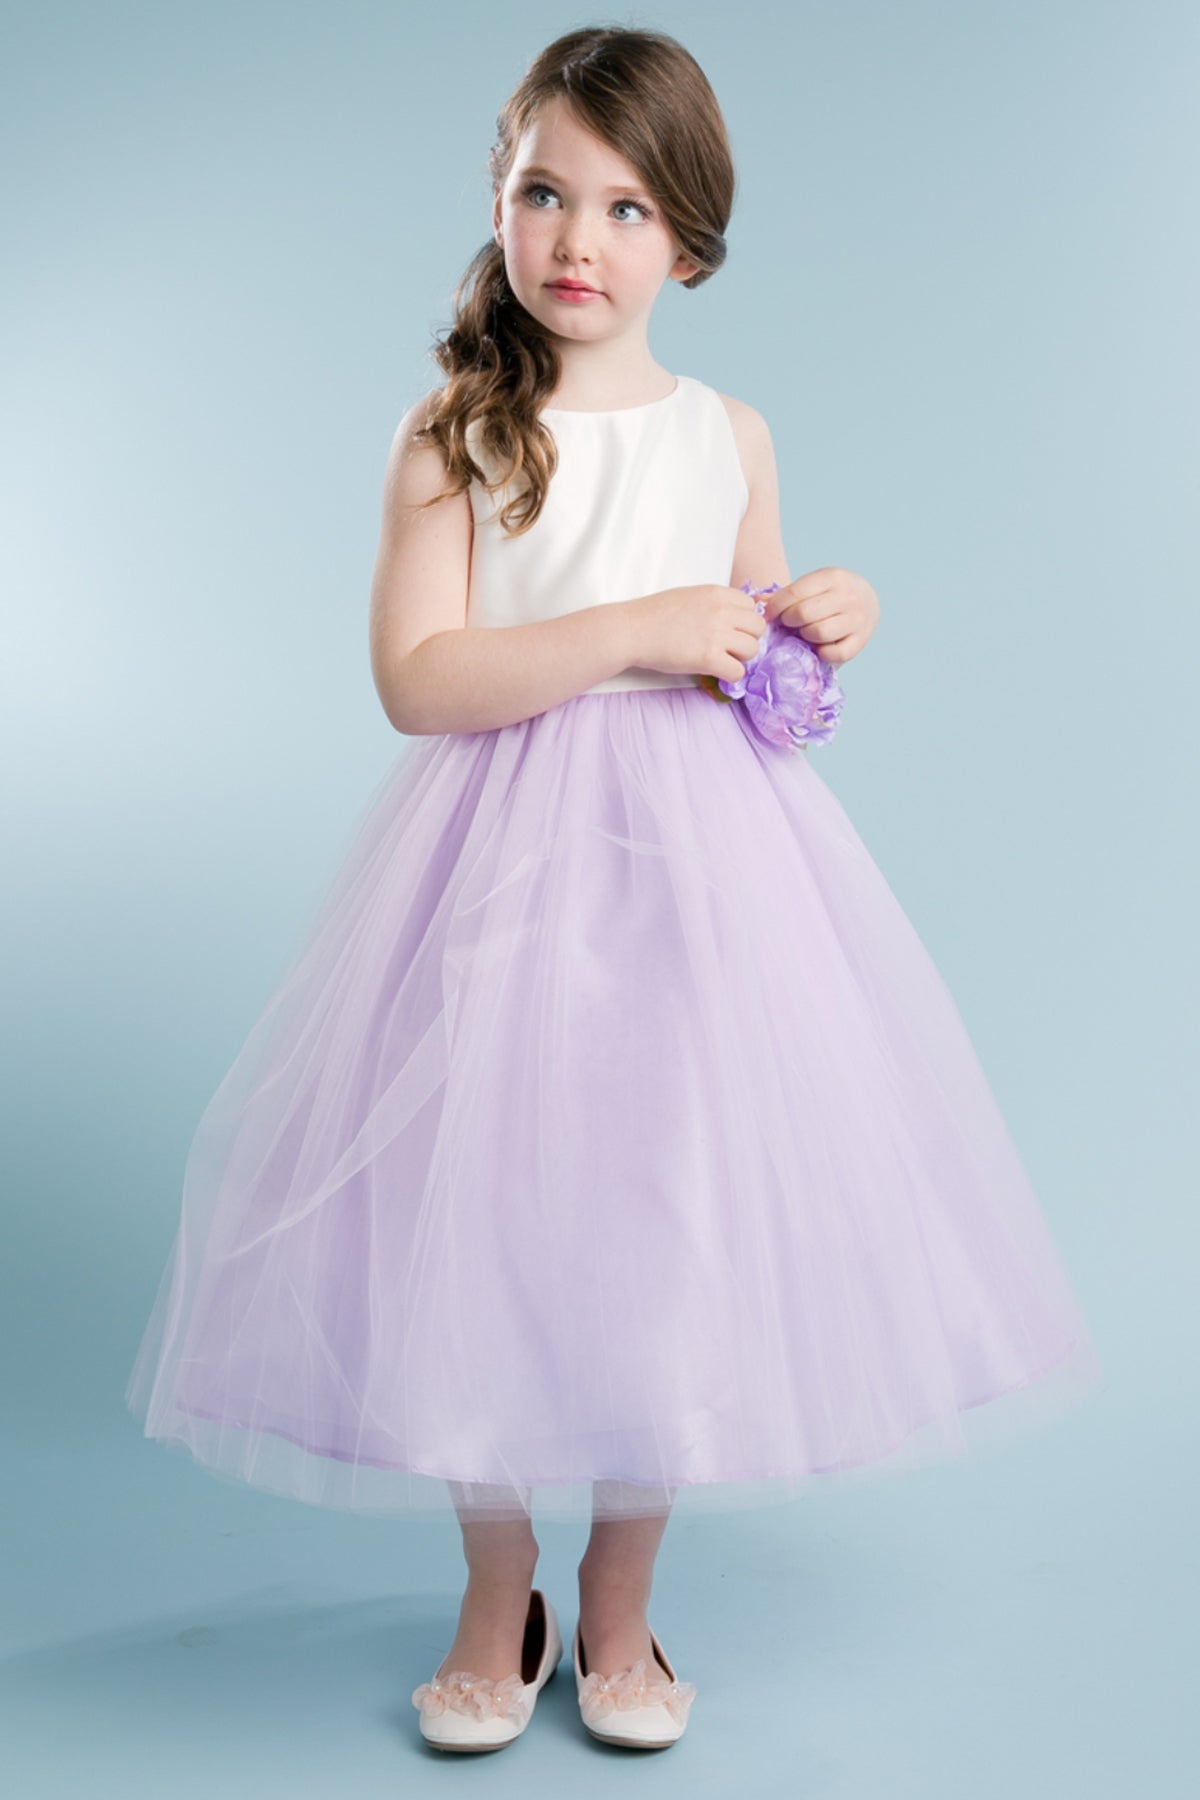 Girls Party Wear Birthday Gown | Baby girl dresses diy, Kids gown, Baby  frocks designs